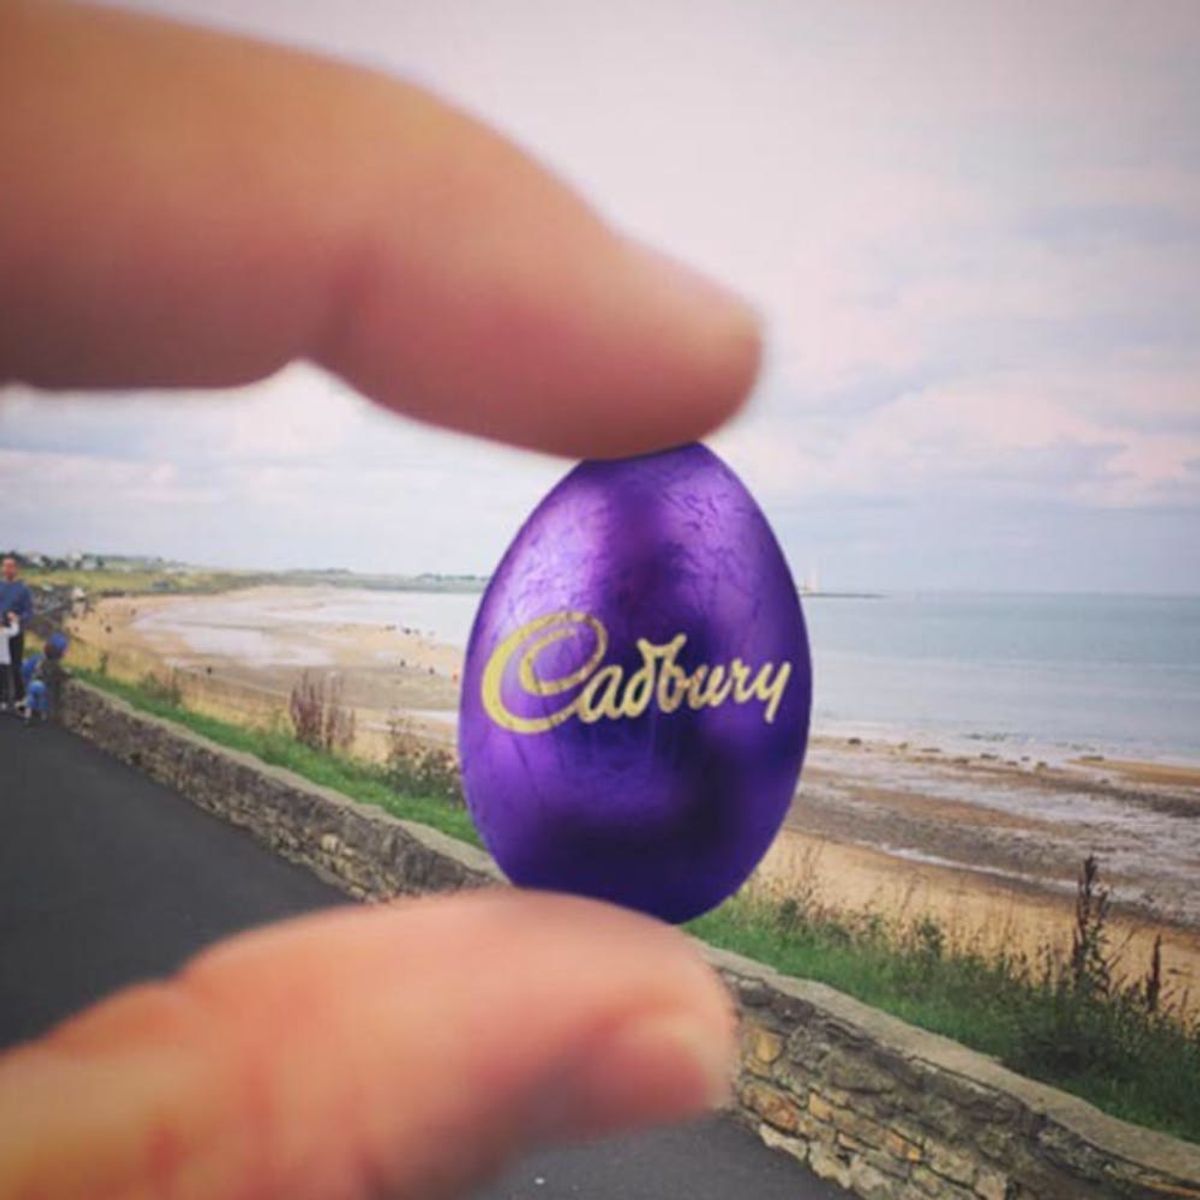 This Is the Secret Cadbury Egg Flavor You’ve Been Missing Out On